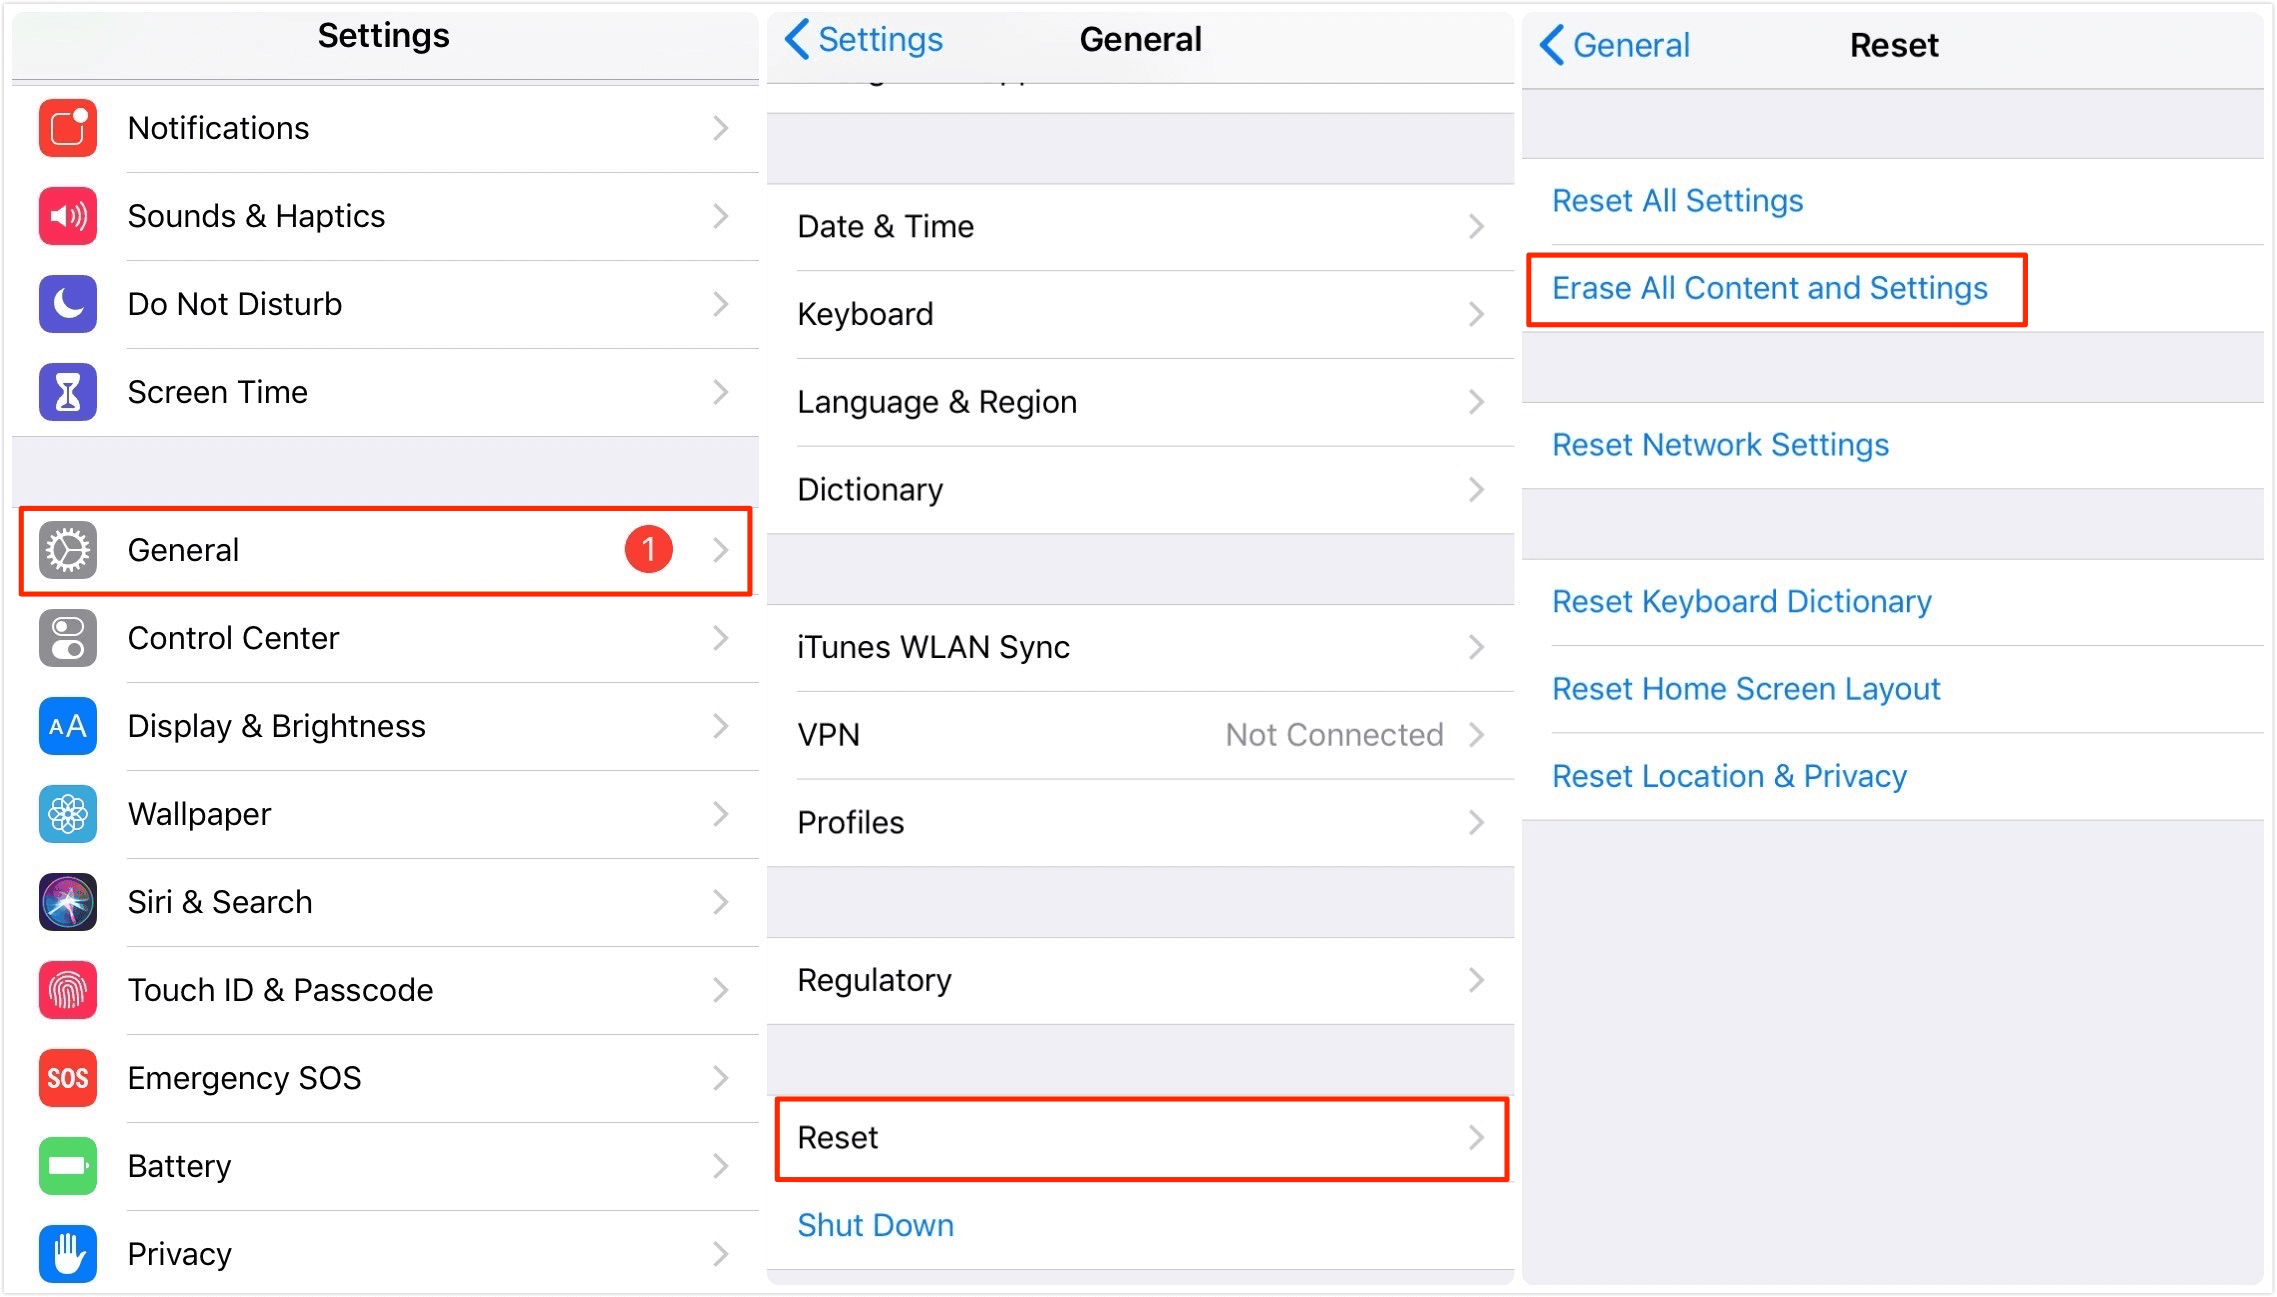 erase content and settings